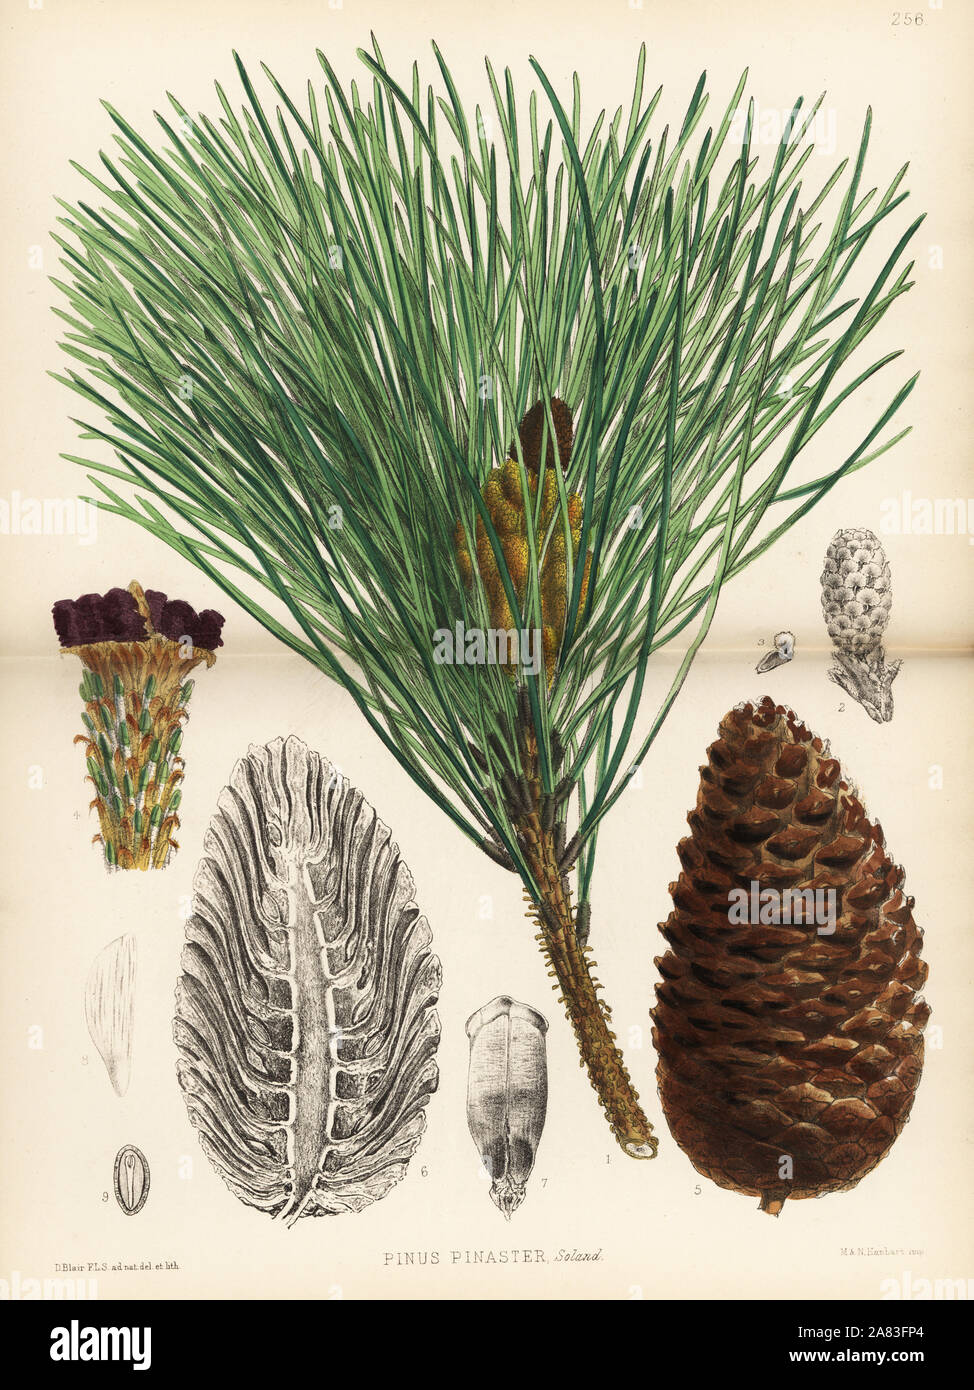 Maritime pine or cluster pine, Pinus pinaster. Handcoloured lithograph by Hanhart after a botanical illustration by David Blair from Robert Bentley and Henry Trimen's Medicinal Plants, London, 1880. Stock Photo